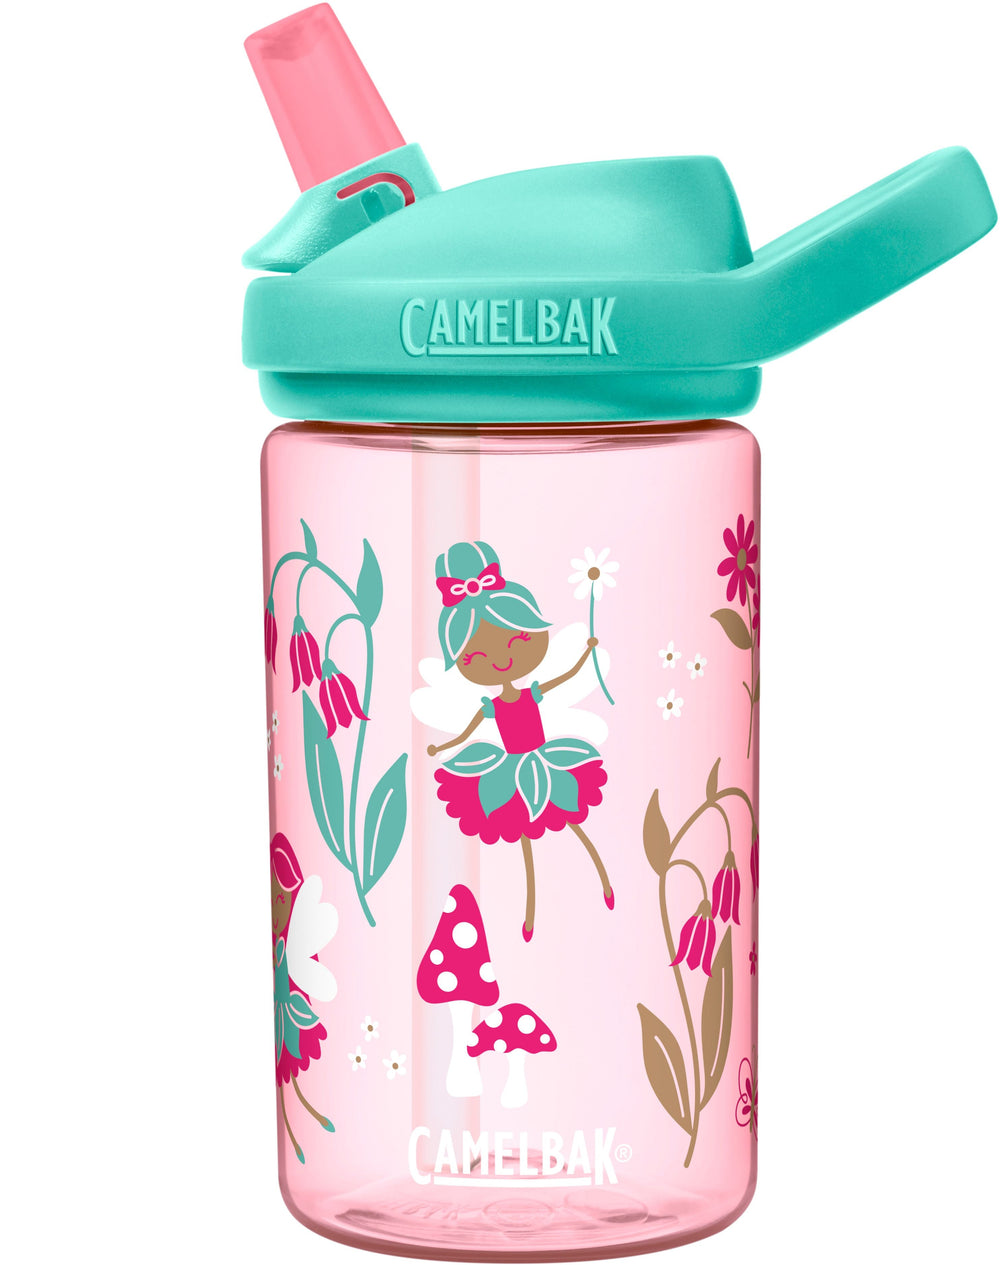 pink bottle with floating fairies , flowers and  toadstools in pinks and teal camelbak logo in white letters with pink bite valve and teal lid